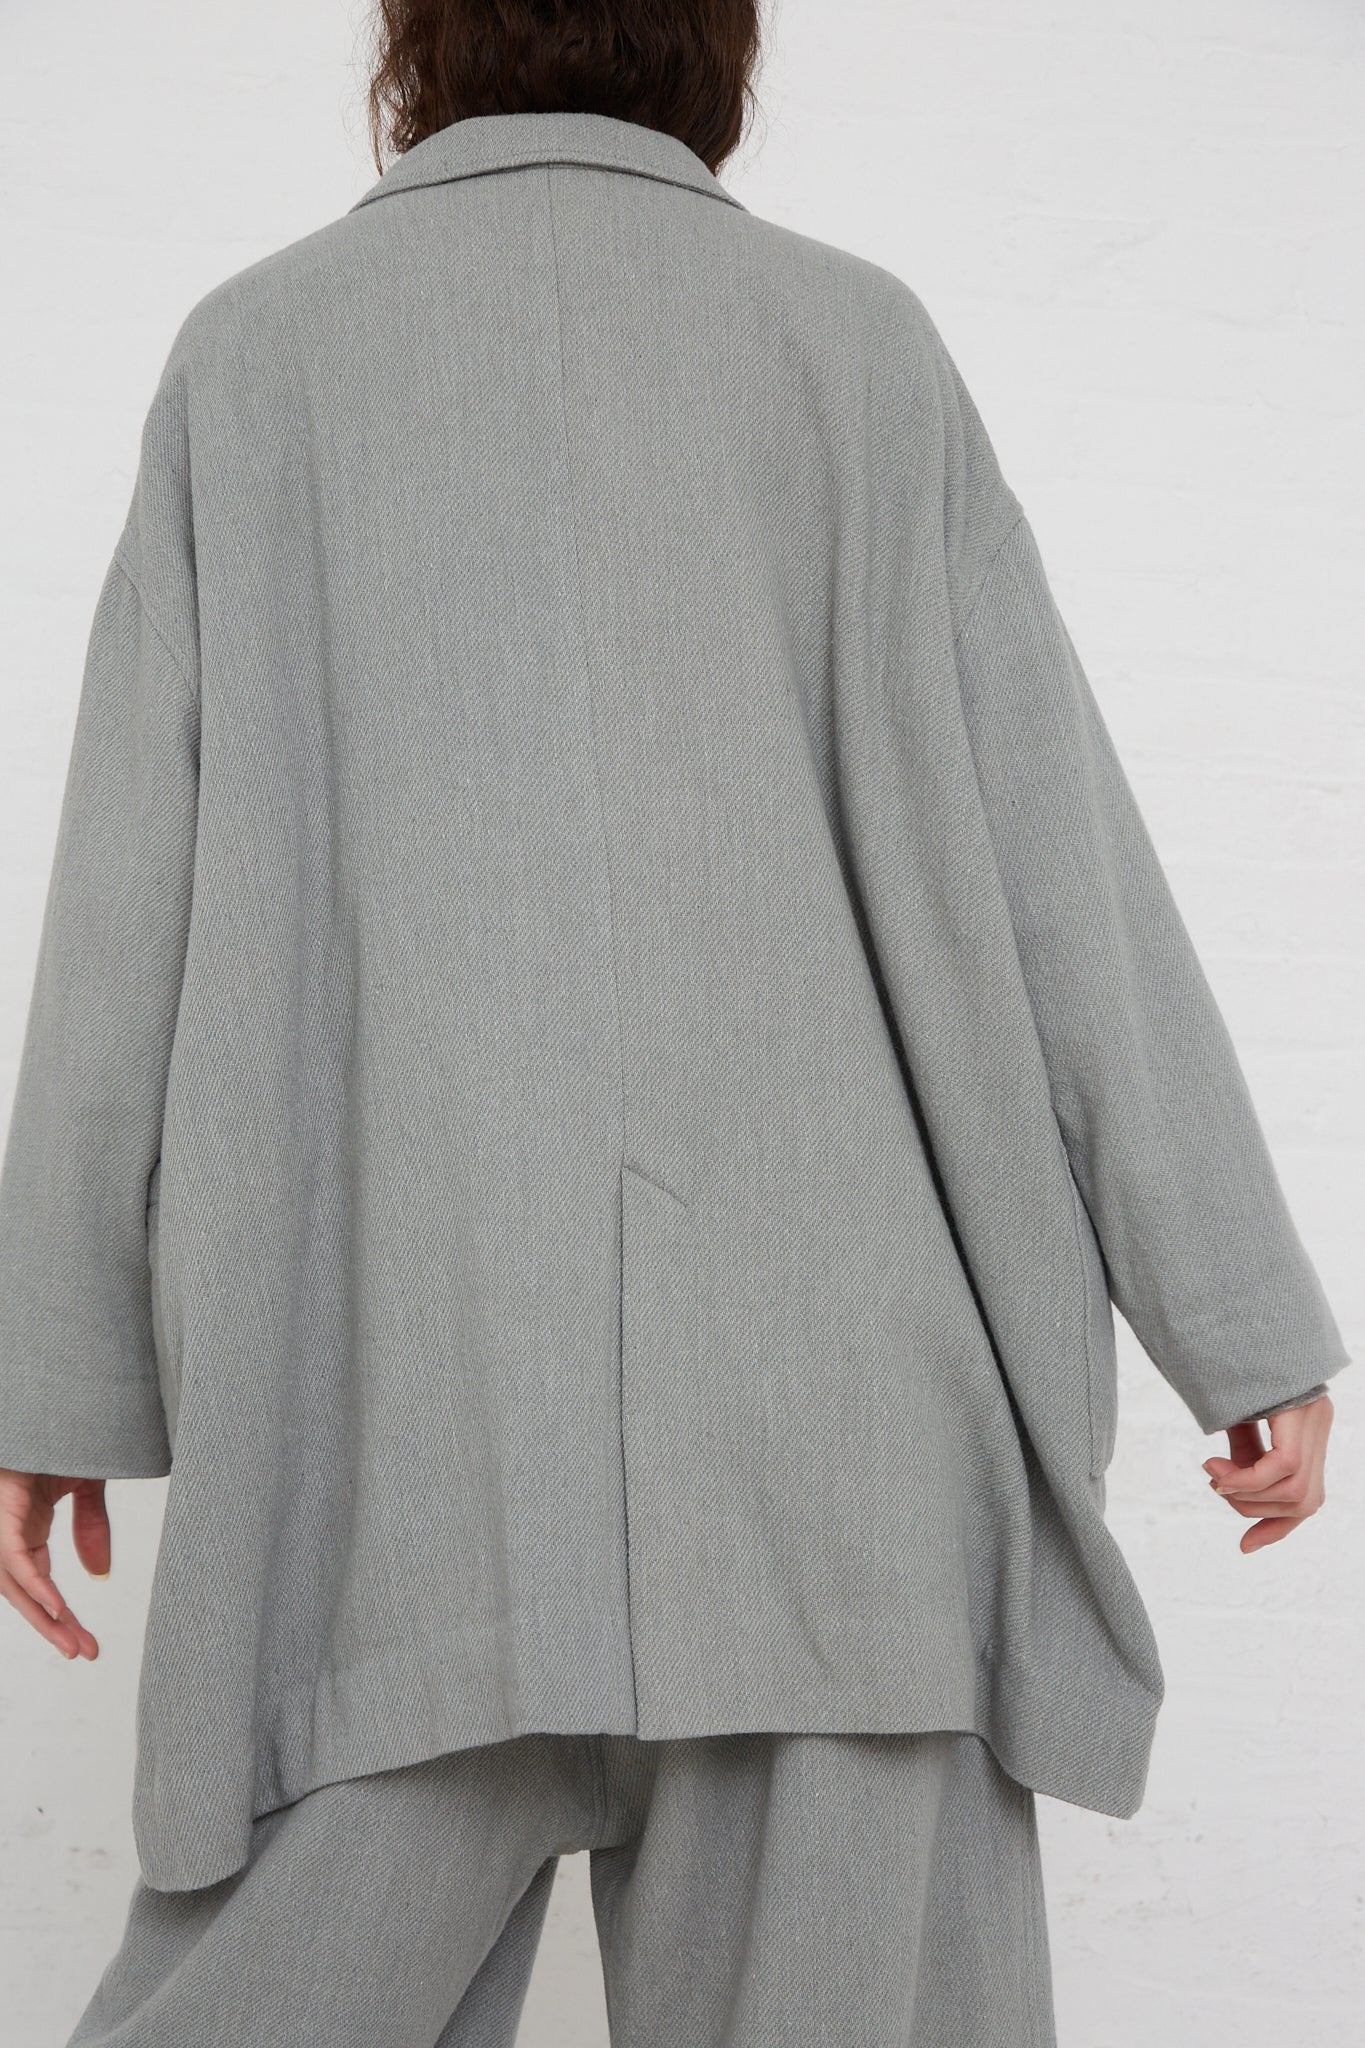 The woman wearing an oversized Ichi Antiquités Merino Wool Orihimedaki Jacket in Blue with patch pockets. Back view.